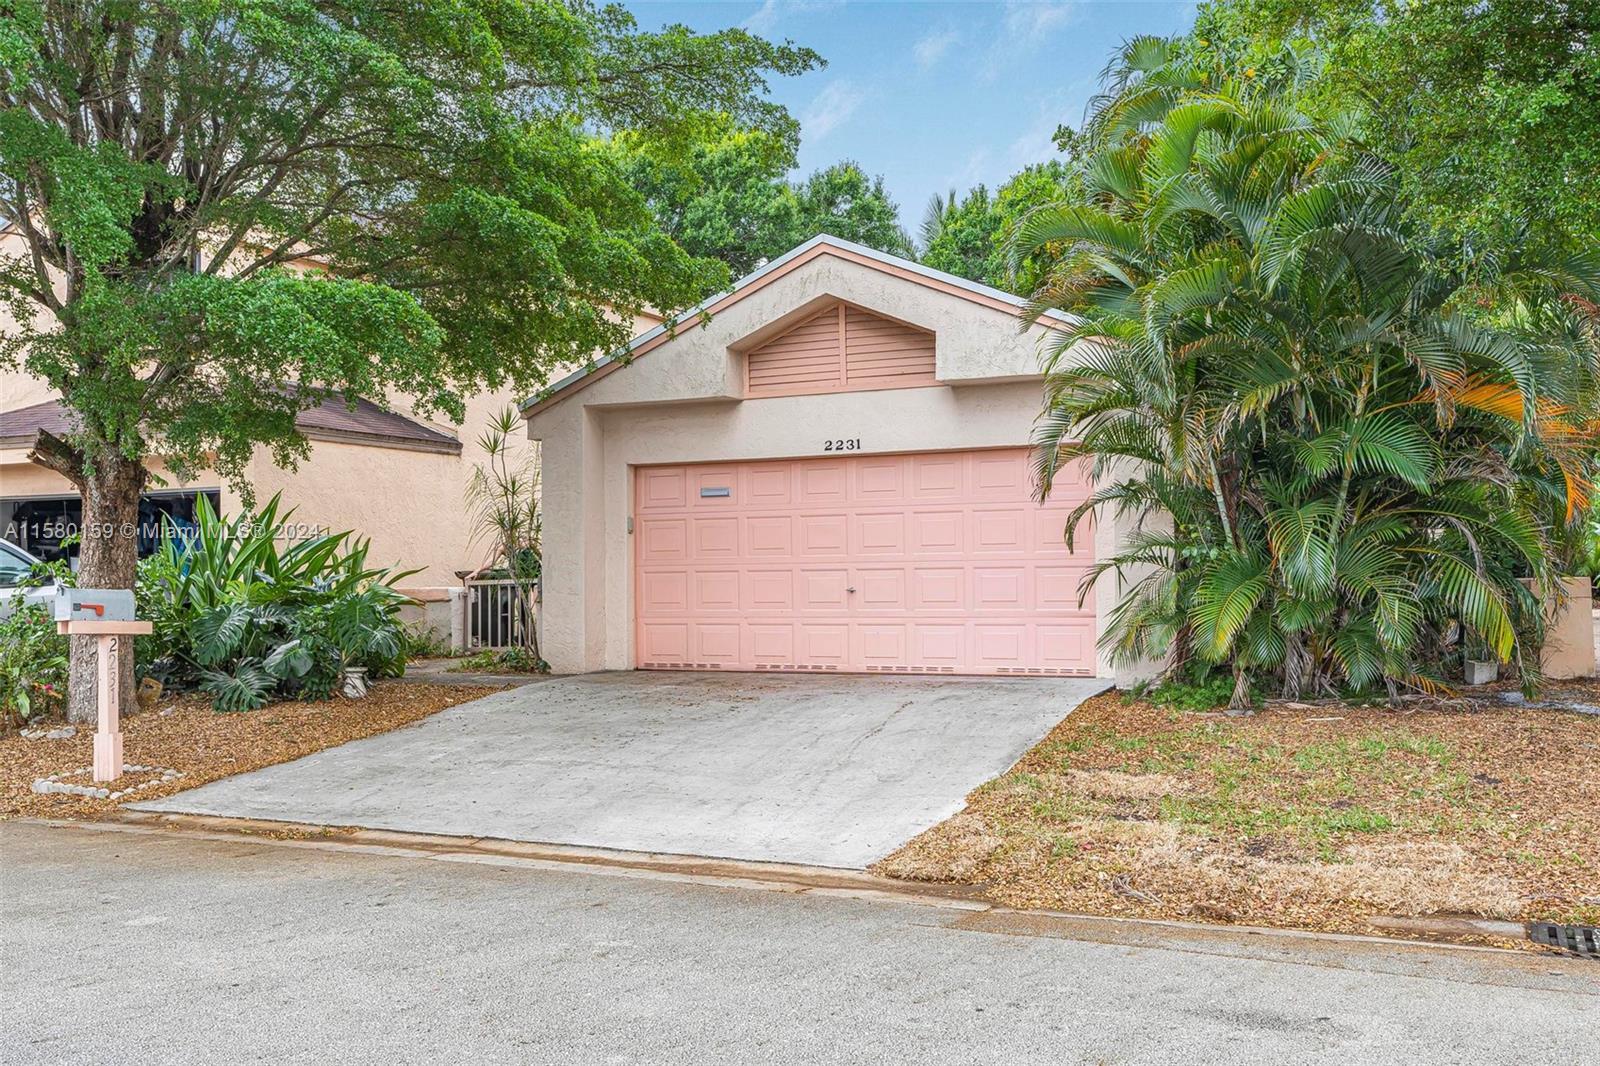 Photo of 2231 NW 34th Ter in Coconut Creek, FL